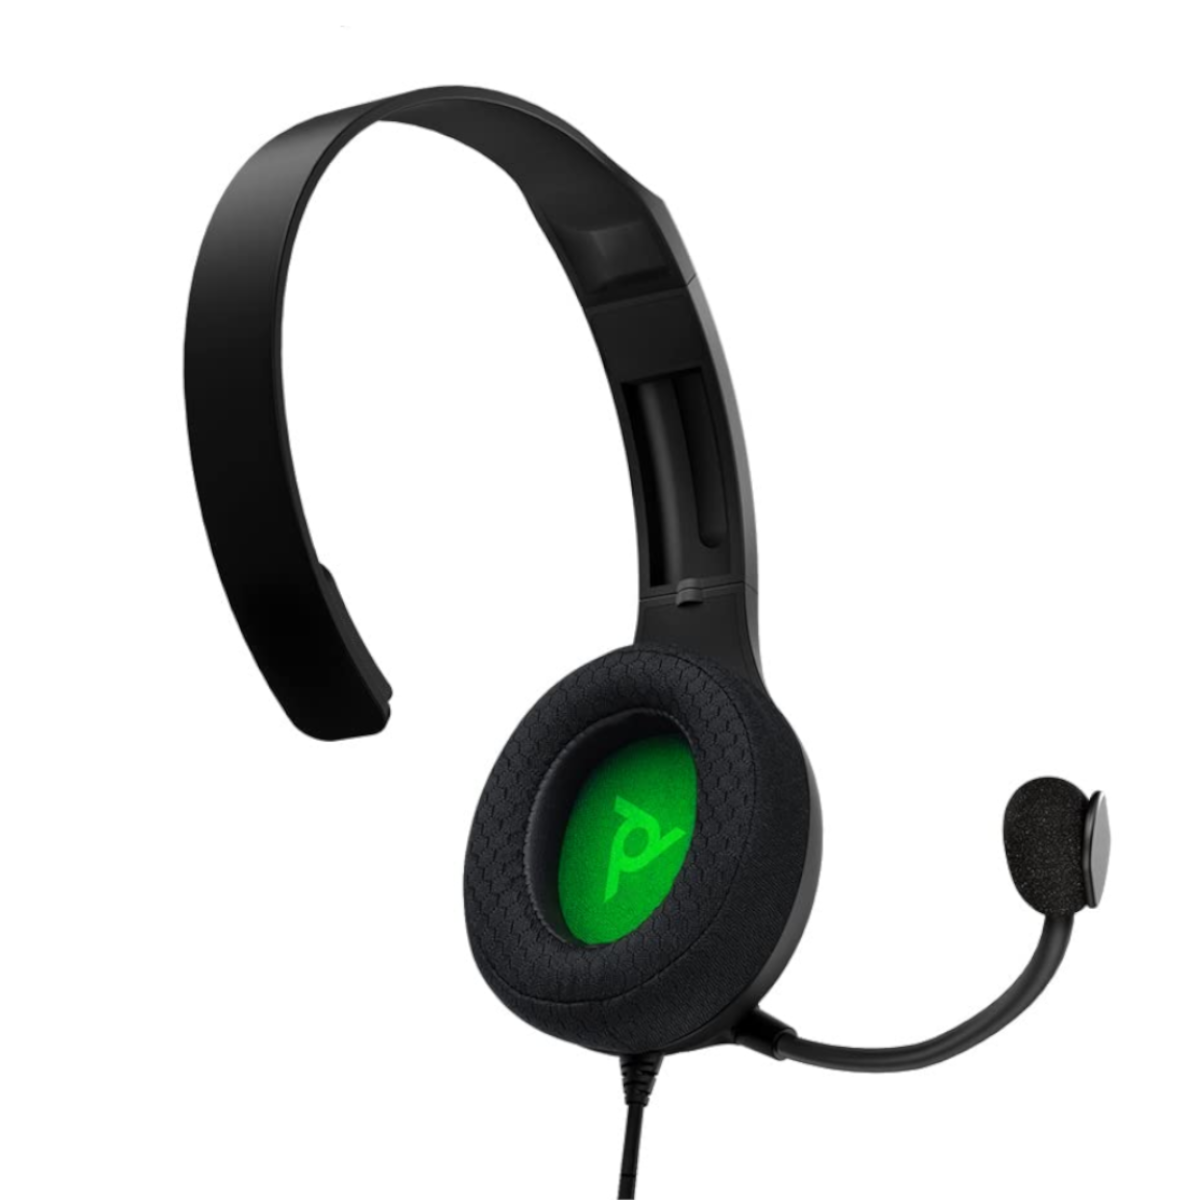 Xbox Series S + Auriculares LVL 40 PDP Gaming Blanco